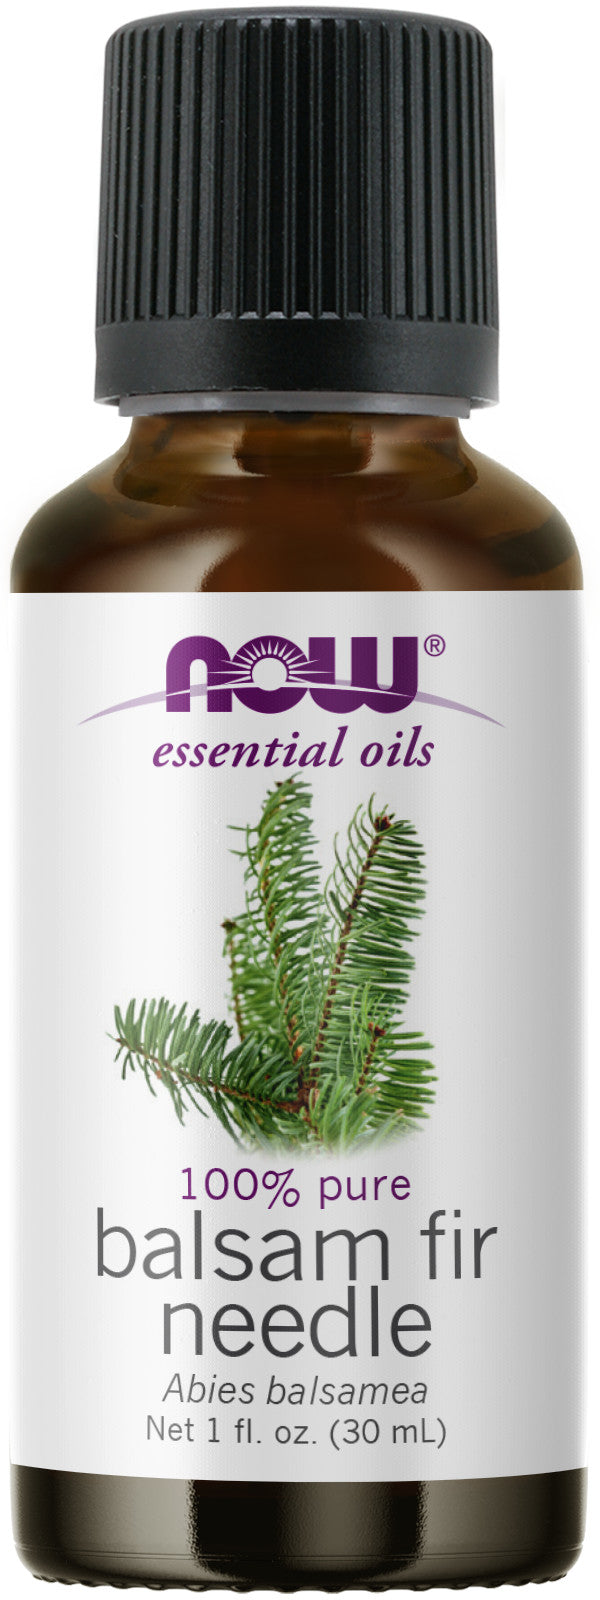 NOW Essential Oils, Balsam Fir Needle Oil, Woodsy Aromatherapy Scent, Steam Distilled, 100% Pure, Vegan, Child Resistant Cap, 1-Ounce